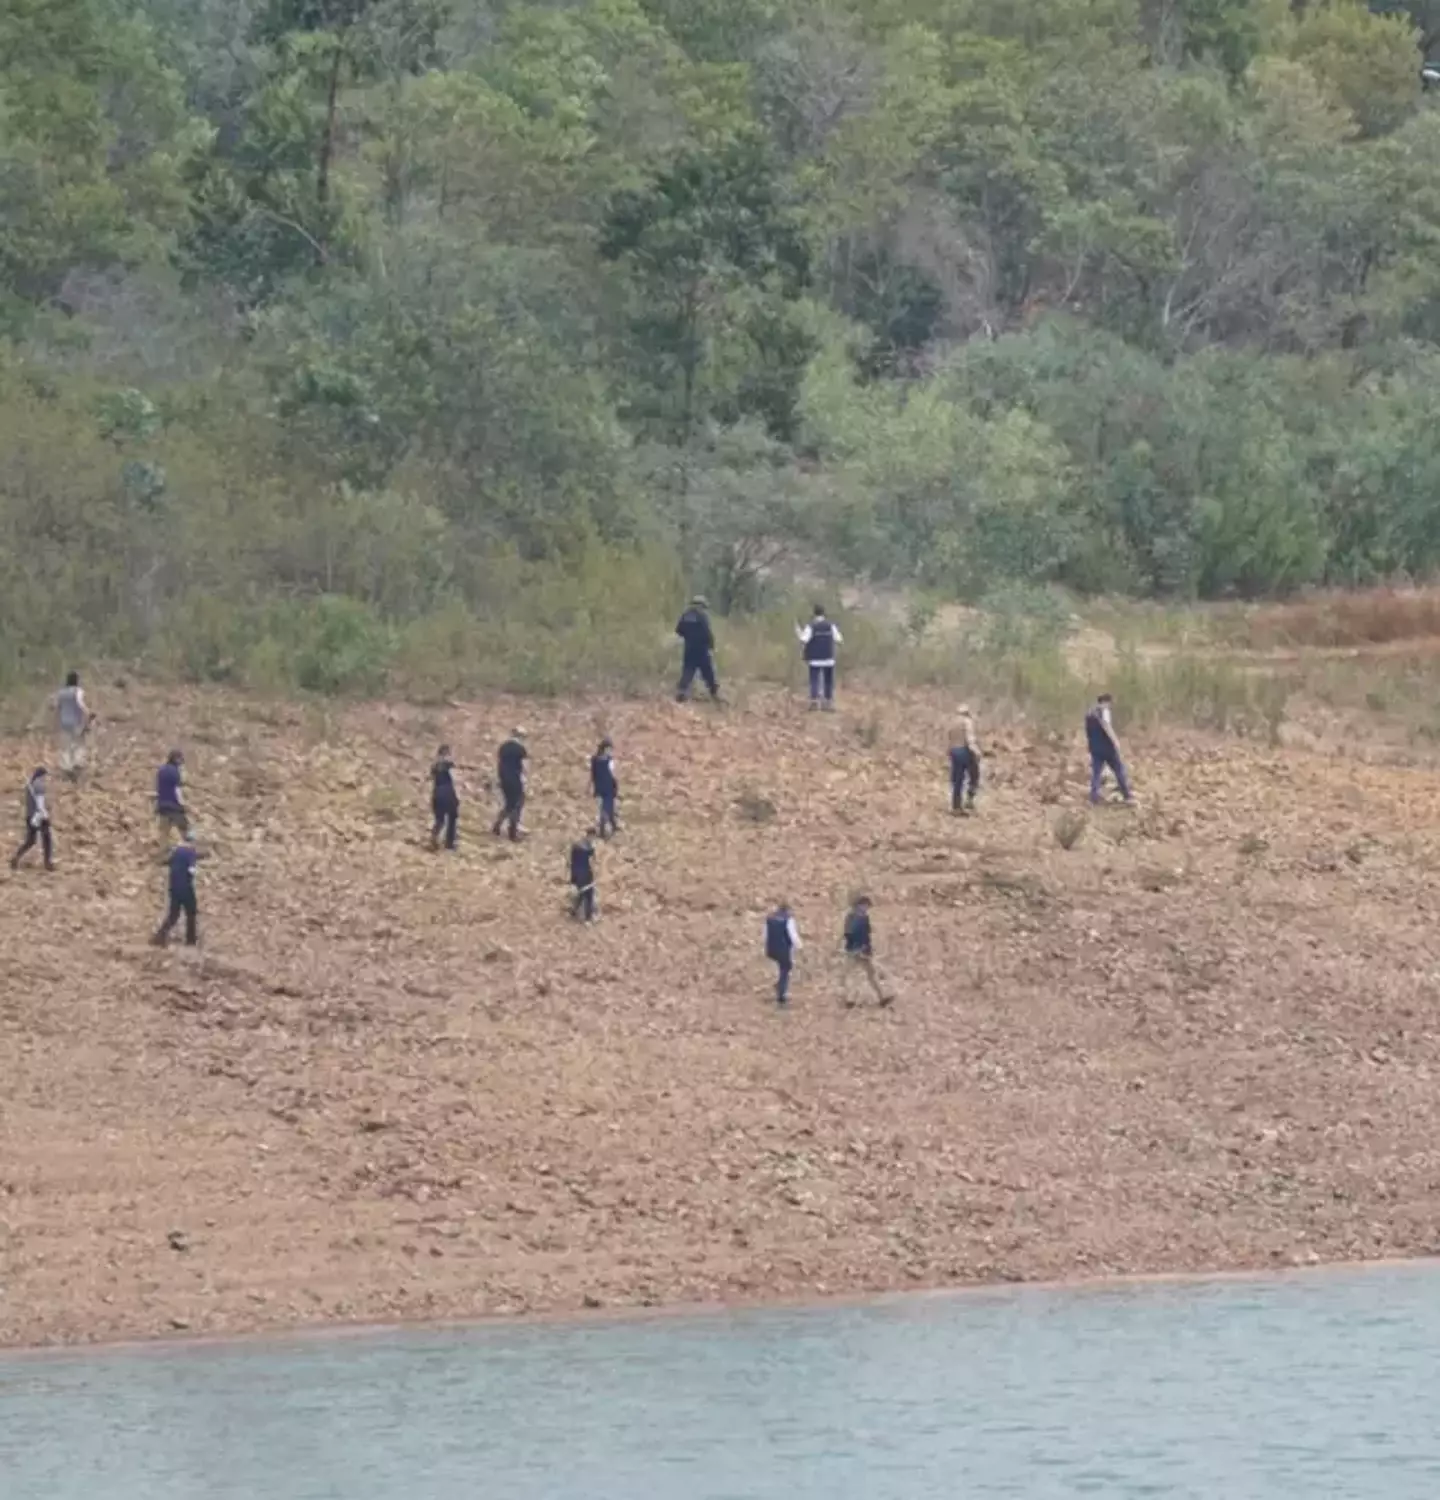 Investigators from Germany and Portugal are searching the Barragem do Arade reservoir.